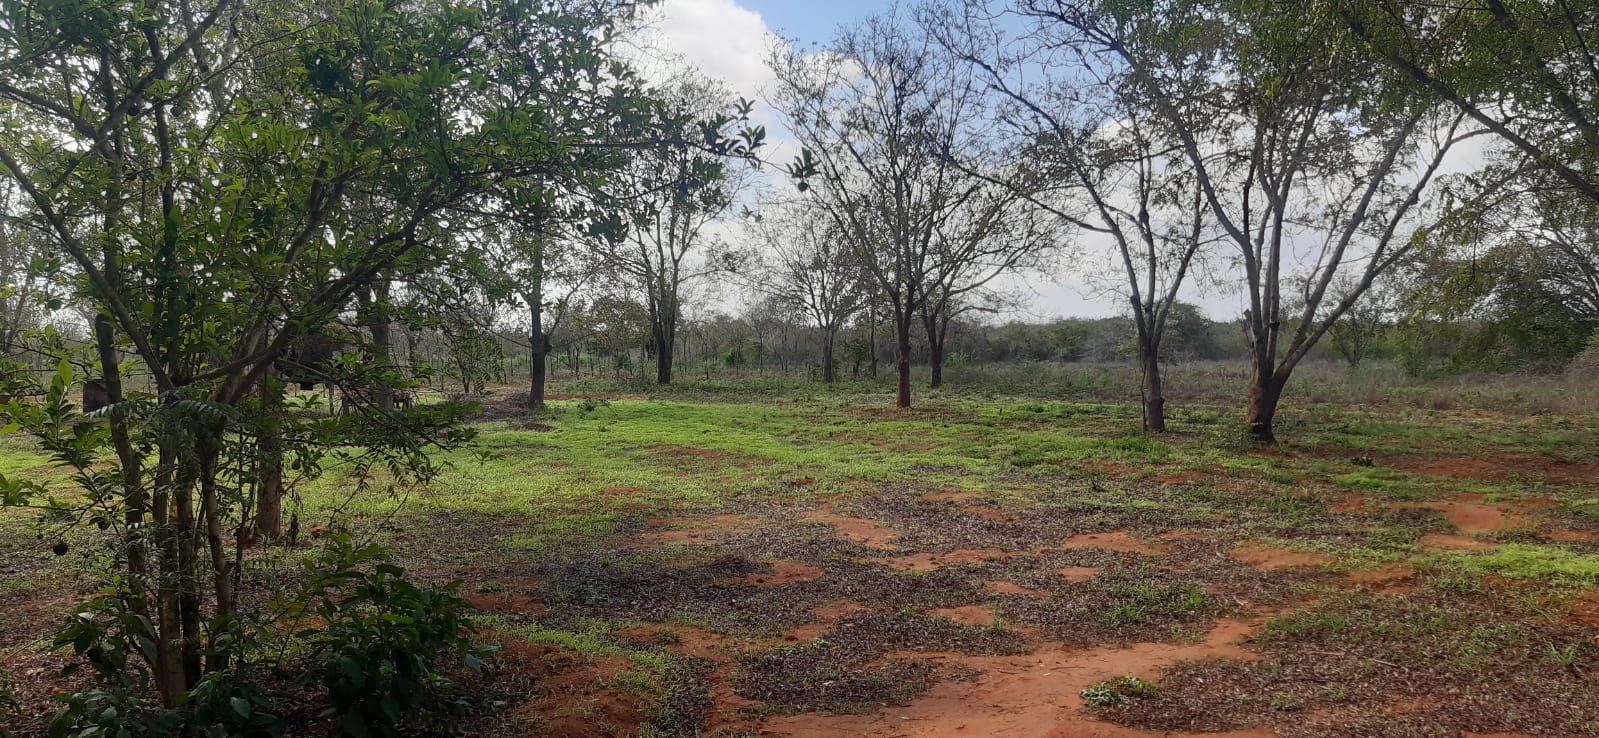 30 Acre land for sale In Malindi